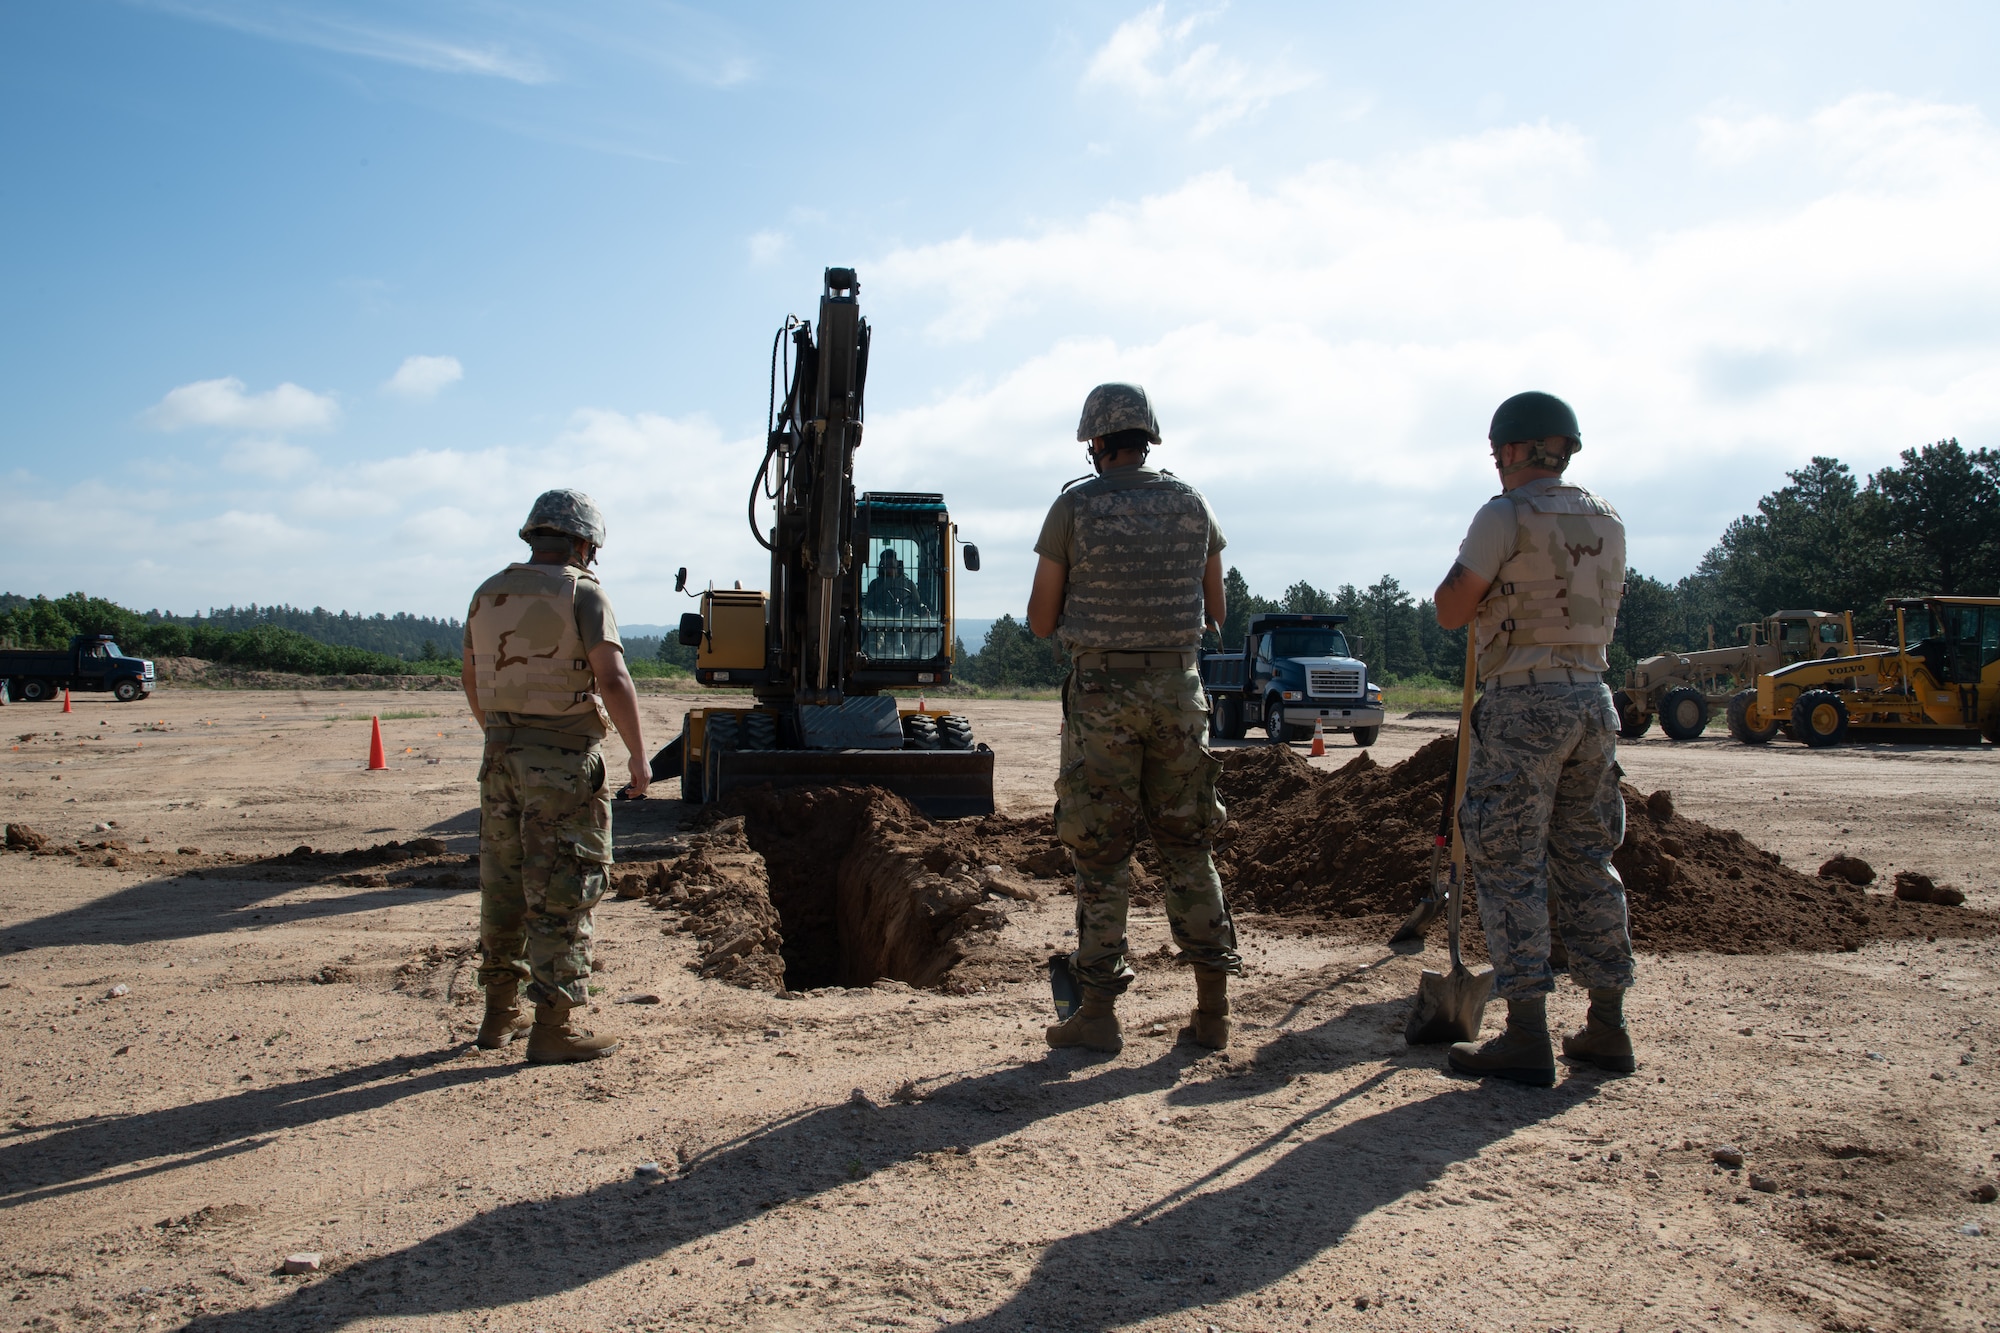 Airmen stand in front of a trench being dug by another Airman operating a heavy equipment excavator.